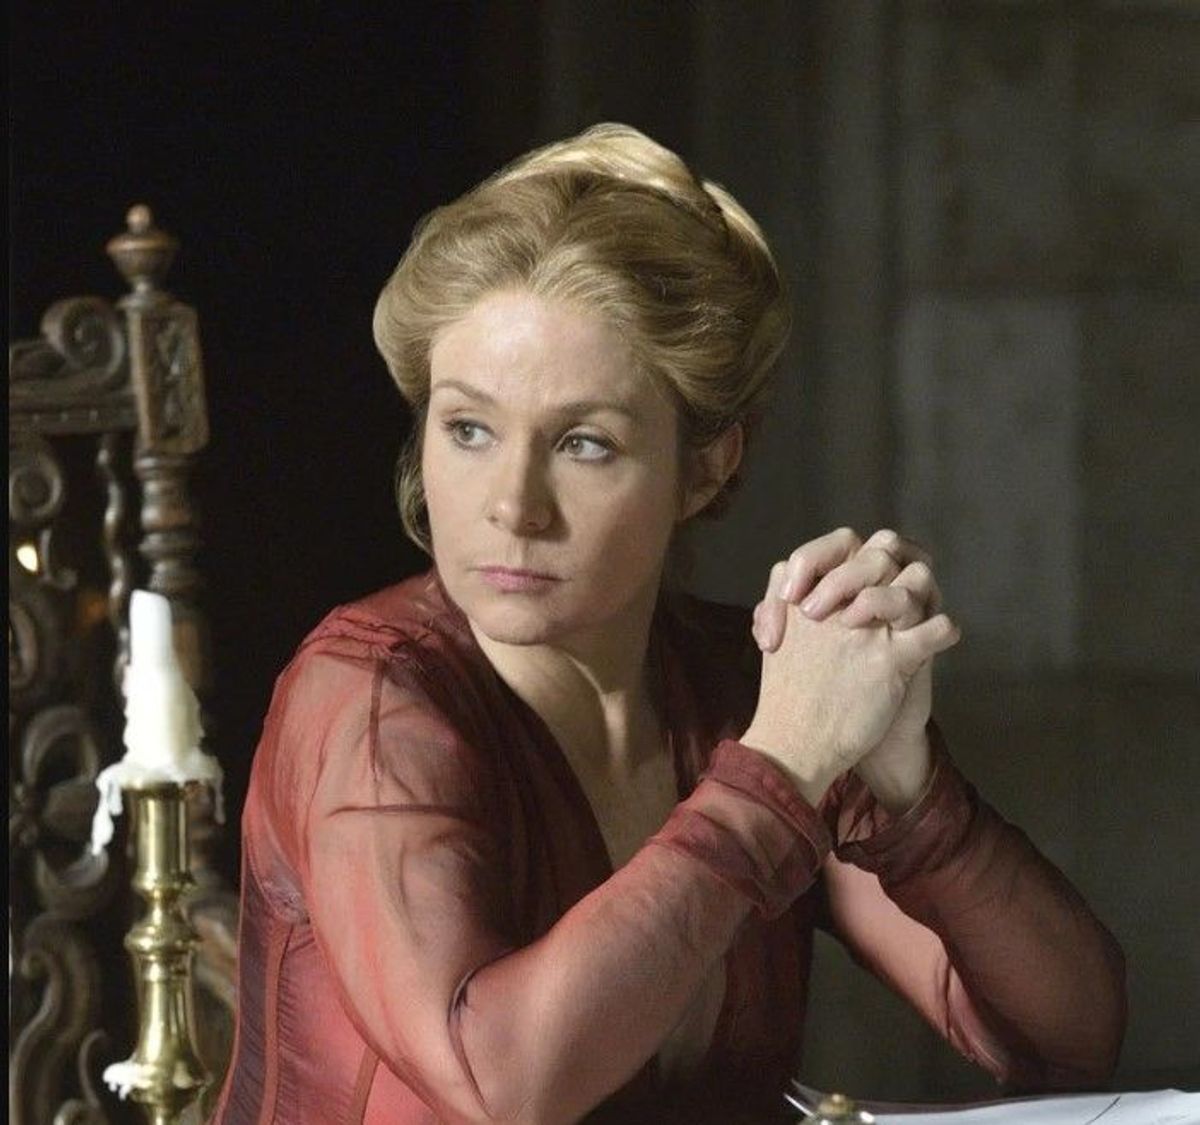 Catherine in Reign